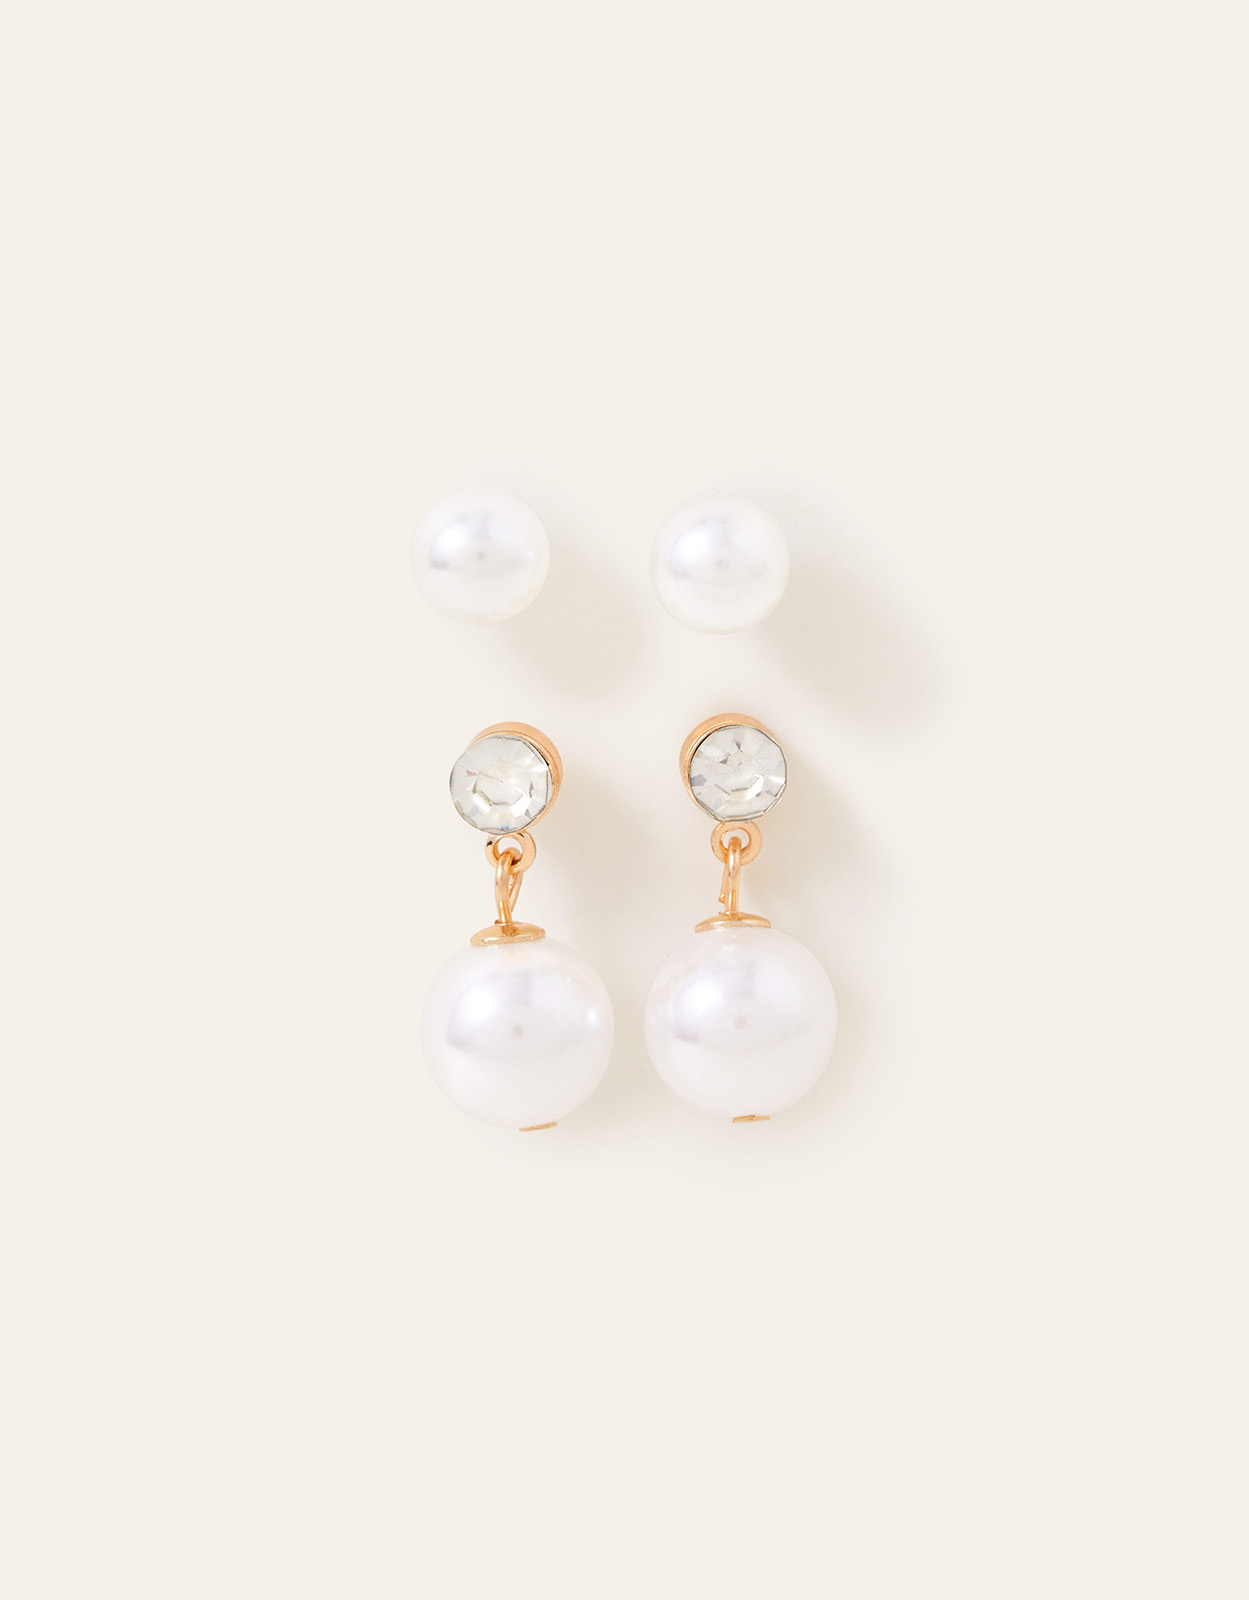 Accessorize Women's Tiny Pearl Stud and Short Drop Earrings Set of Two, Size: 2cm